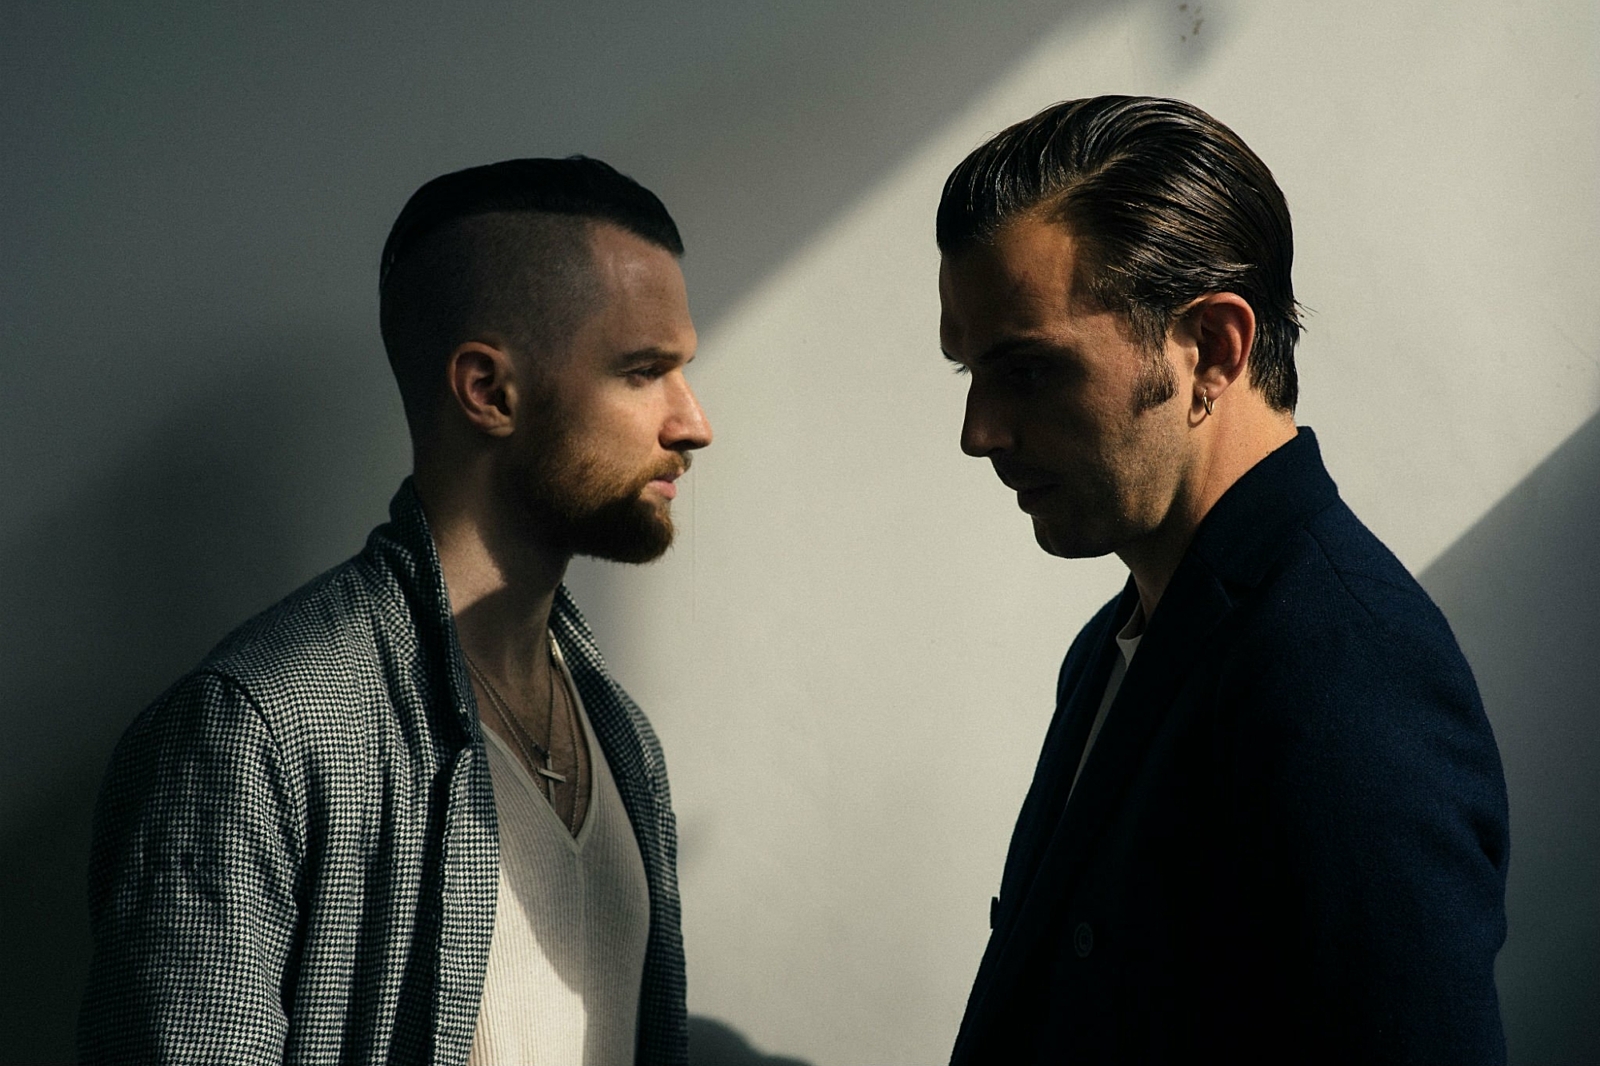 Hurts: Surrender to the unexpected